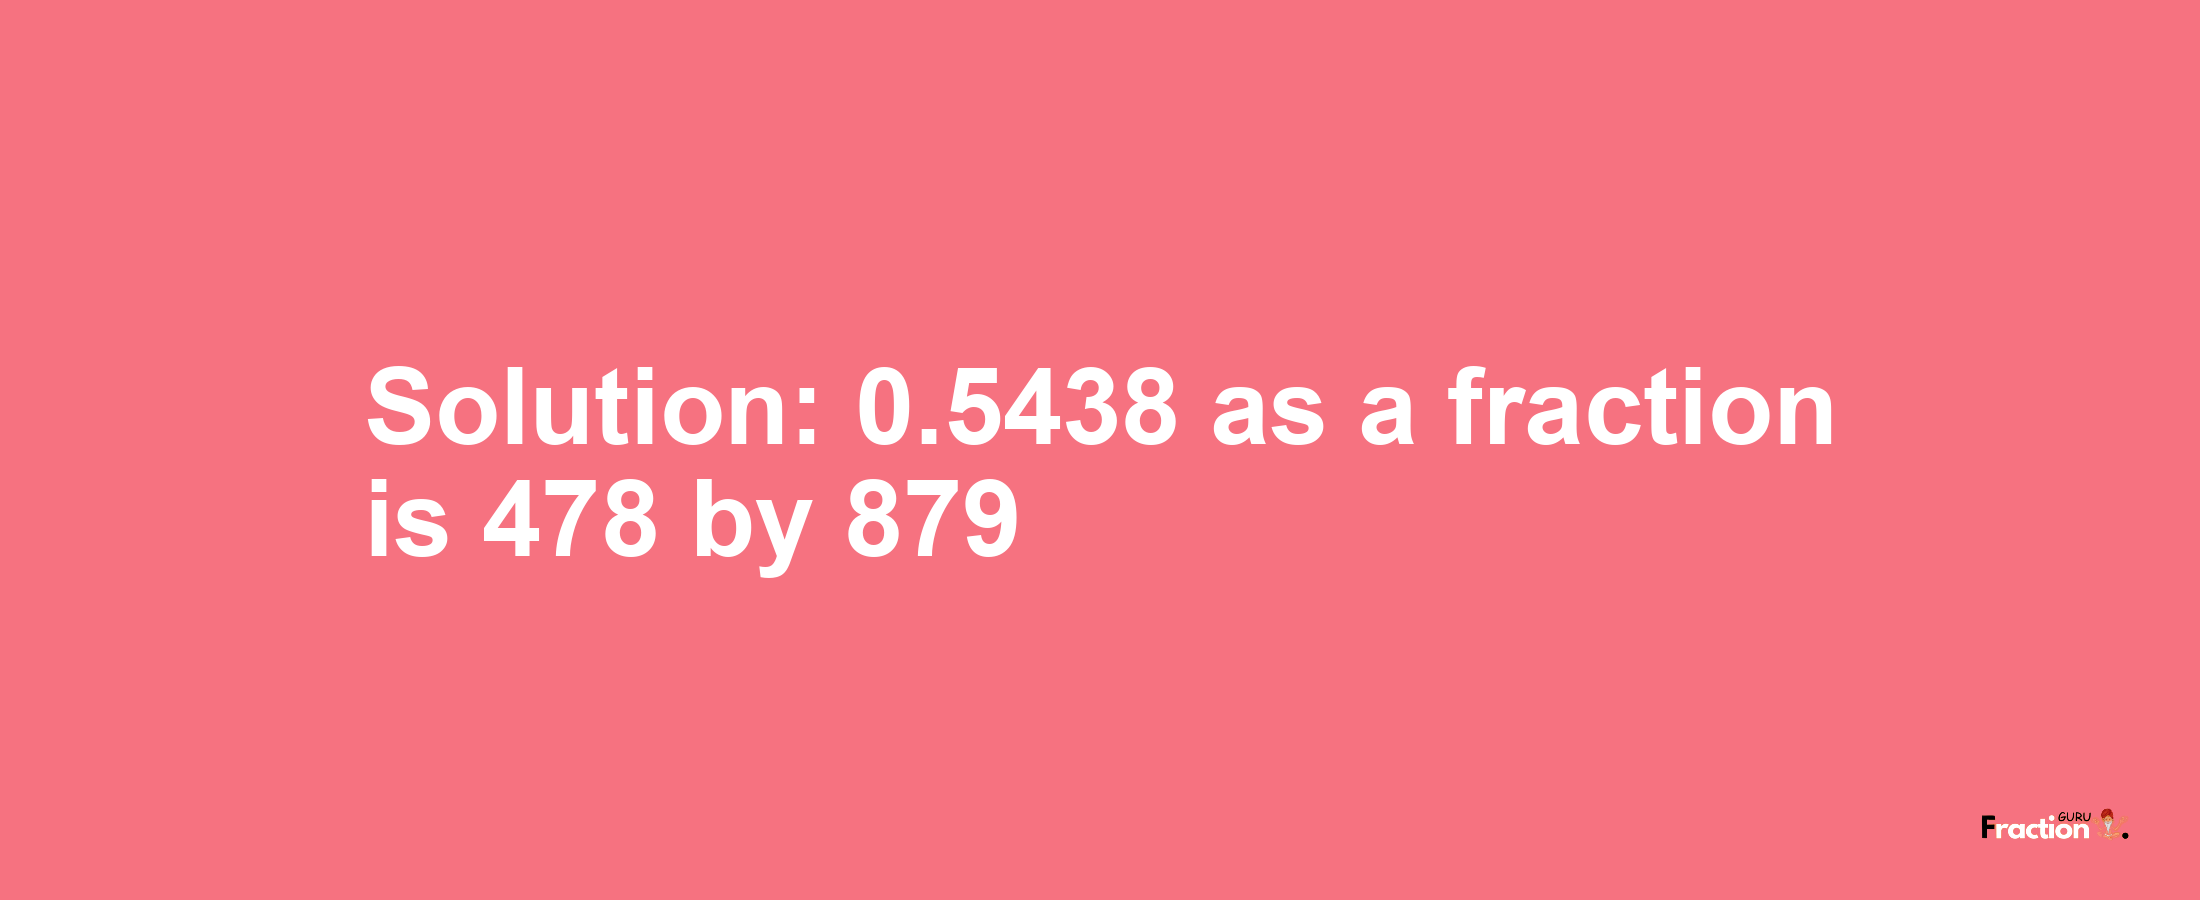 Solution:0.5438 as a fraction is 478/879